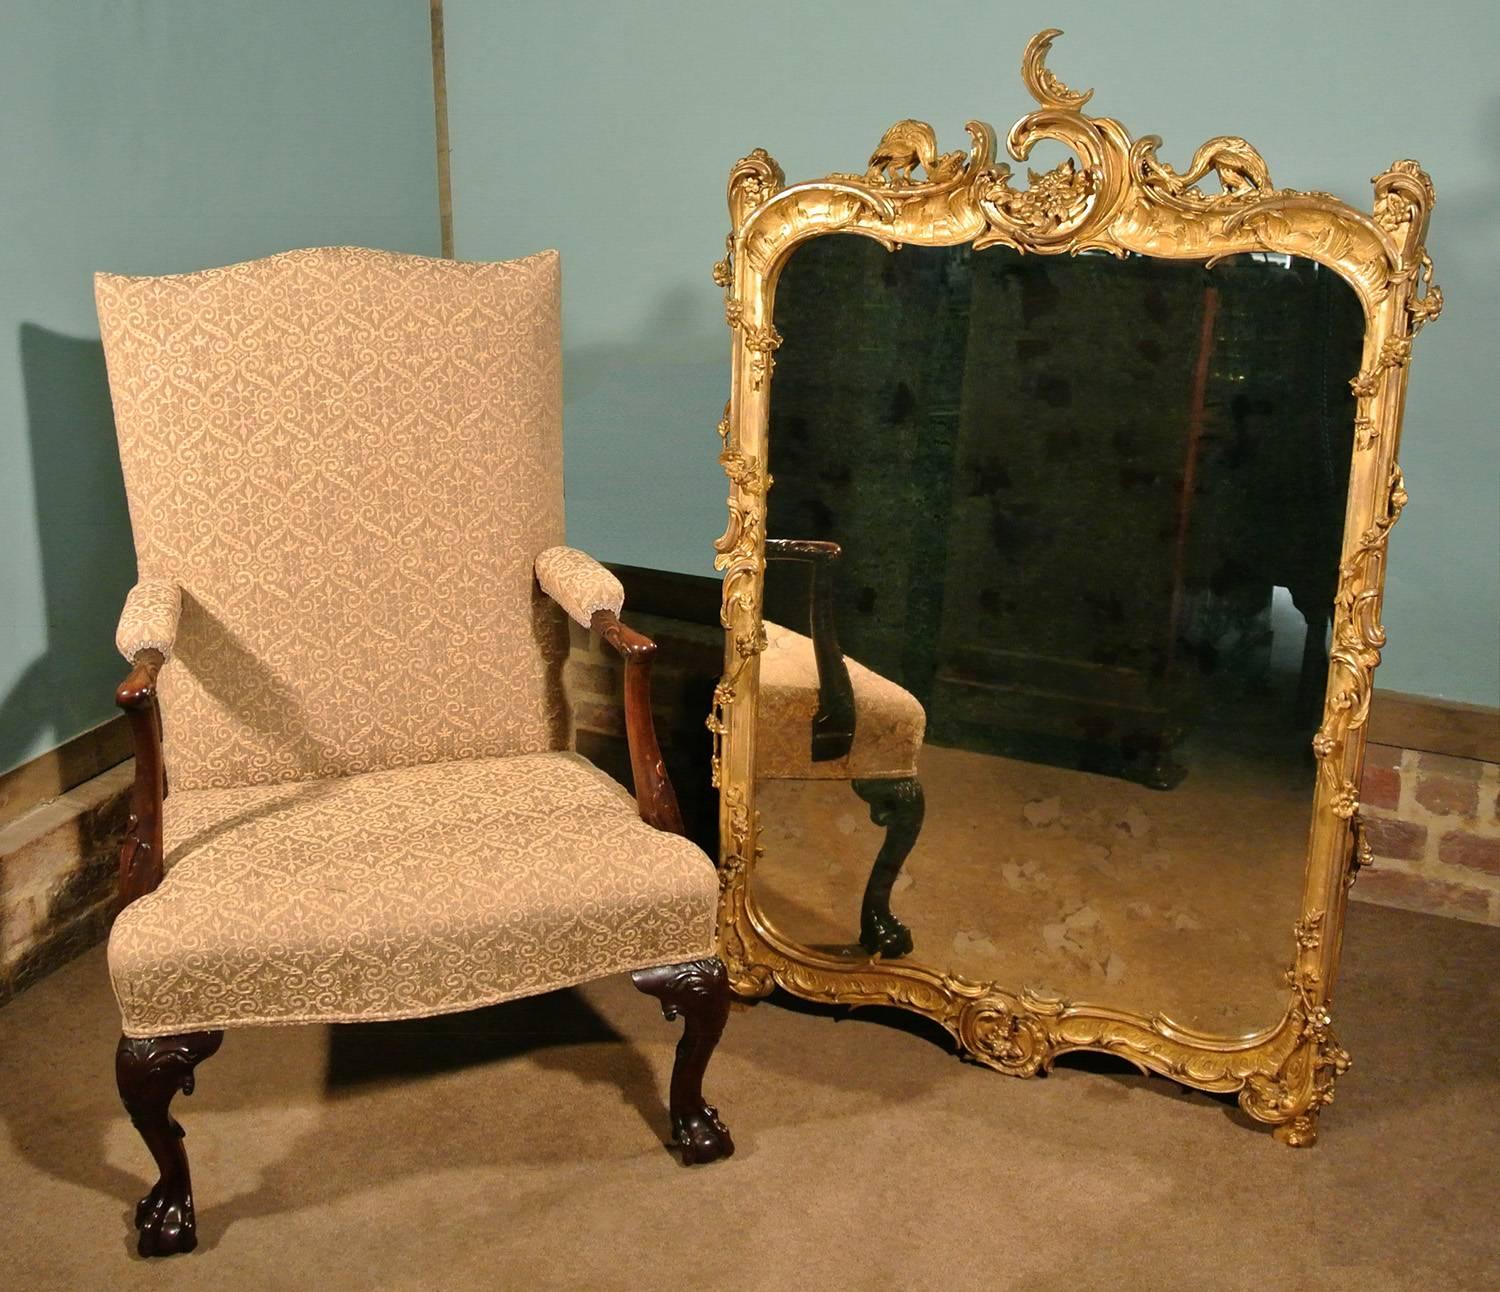 A very fine and elaborately carved George II giltwood frame with a later mirror plate (the plate made with some distressing to appear much older). 

This was originally a floor standing screen and the decoration is identical to both sides. It